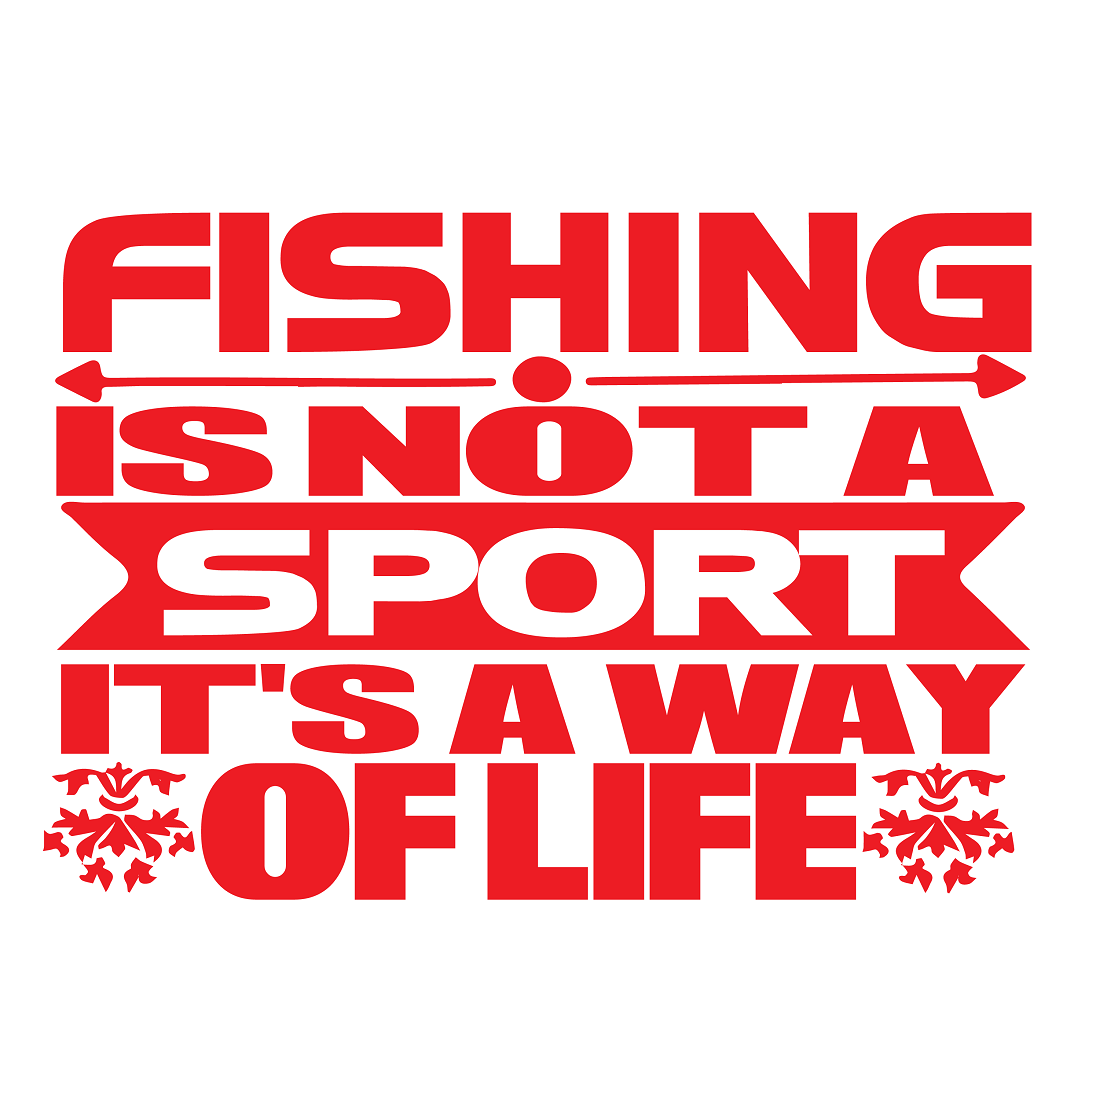 Fishing is not a sport it's away of life preview image.